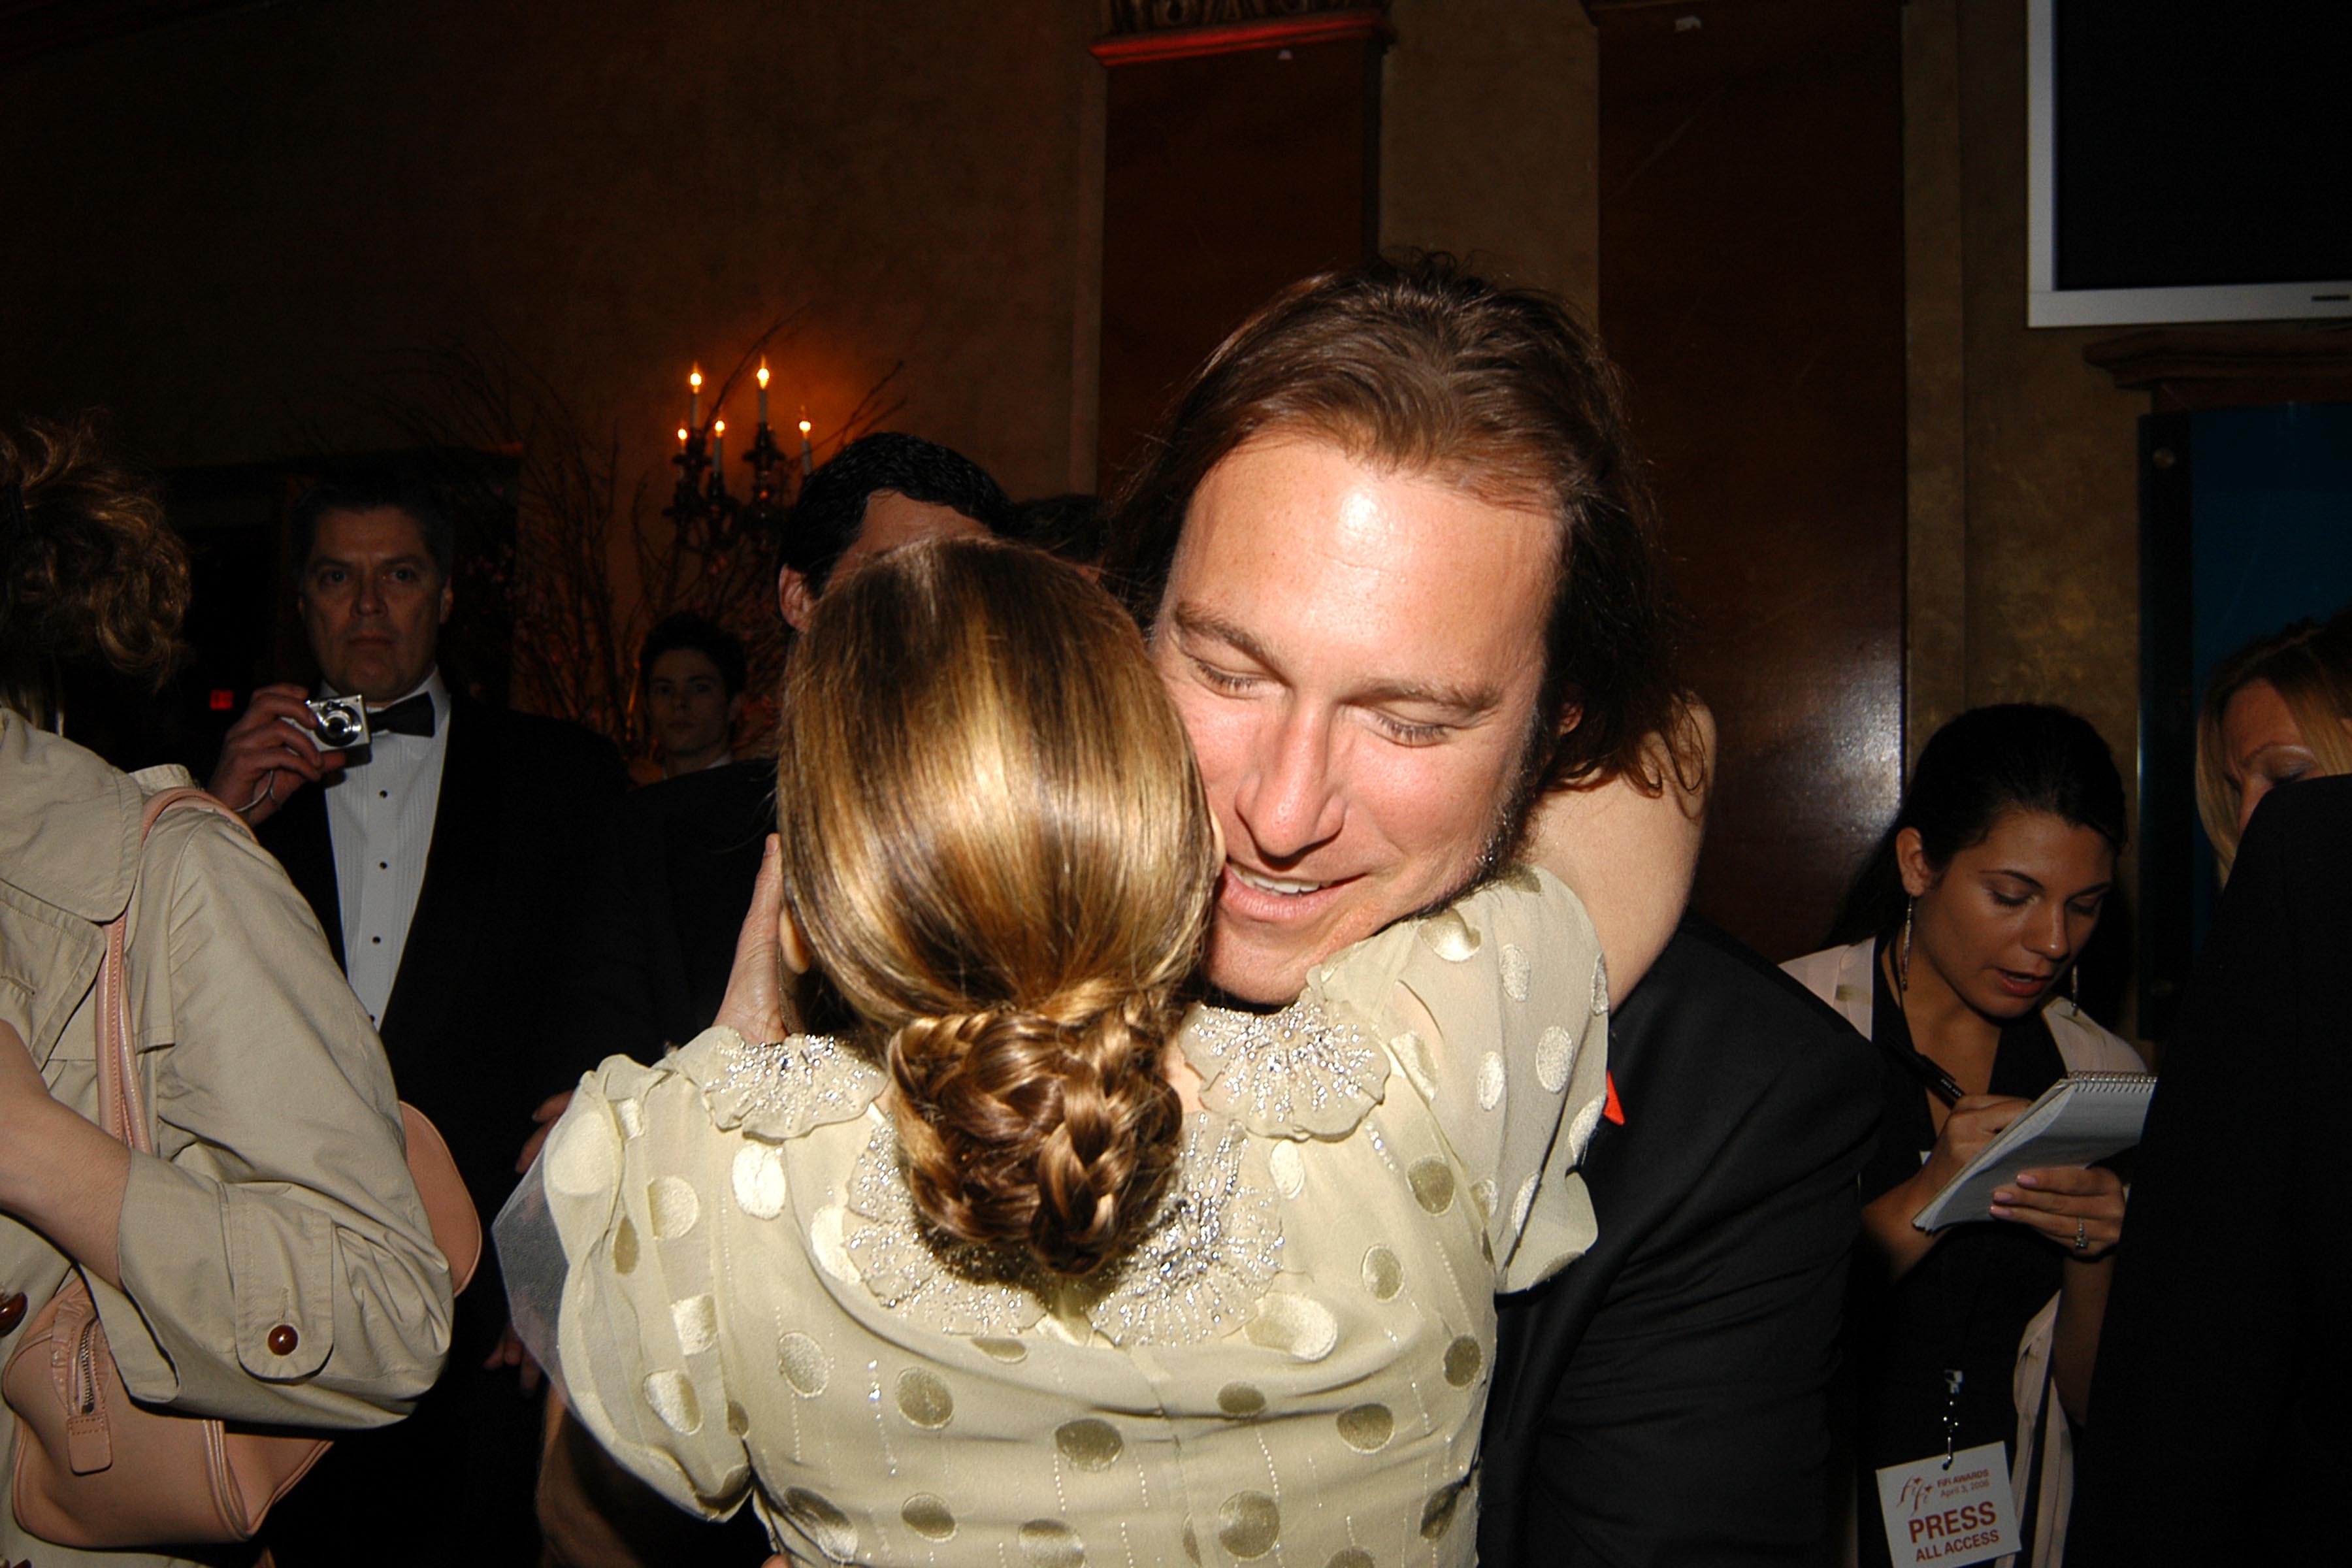 John Corbett and Sarah Jessica Parker embrace at the Fragrance Foundation Presents the 34th Annual FIFI Awards in 2006